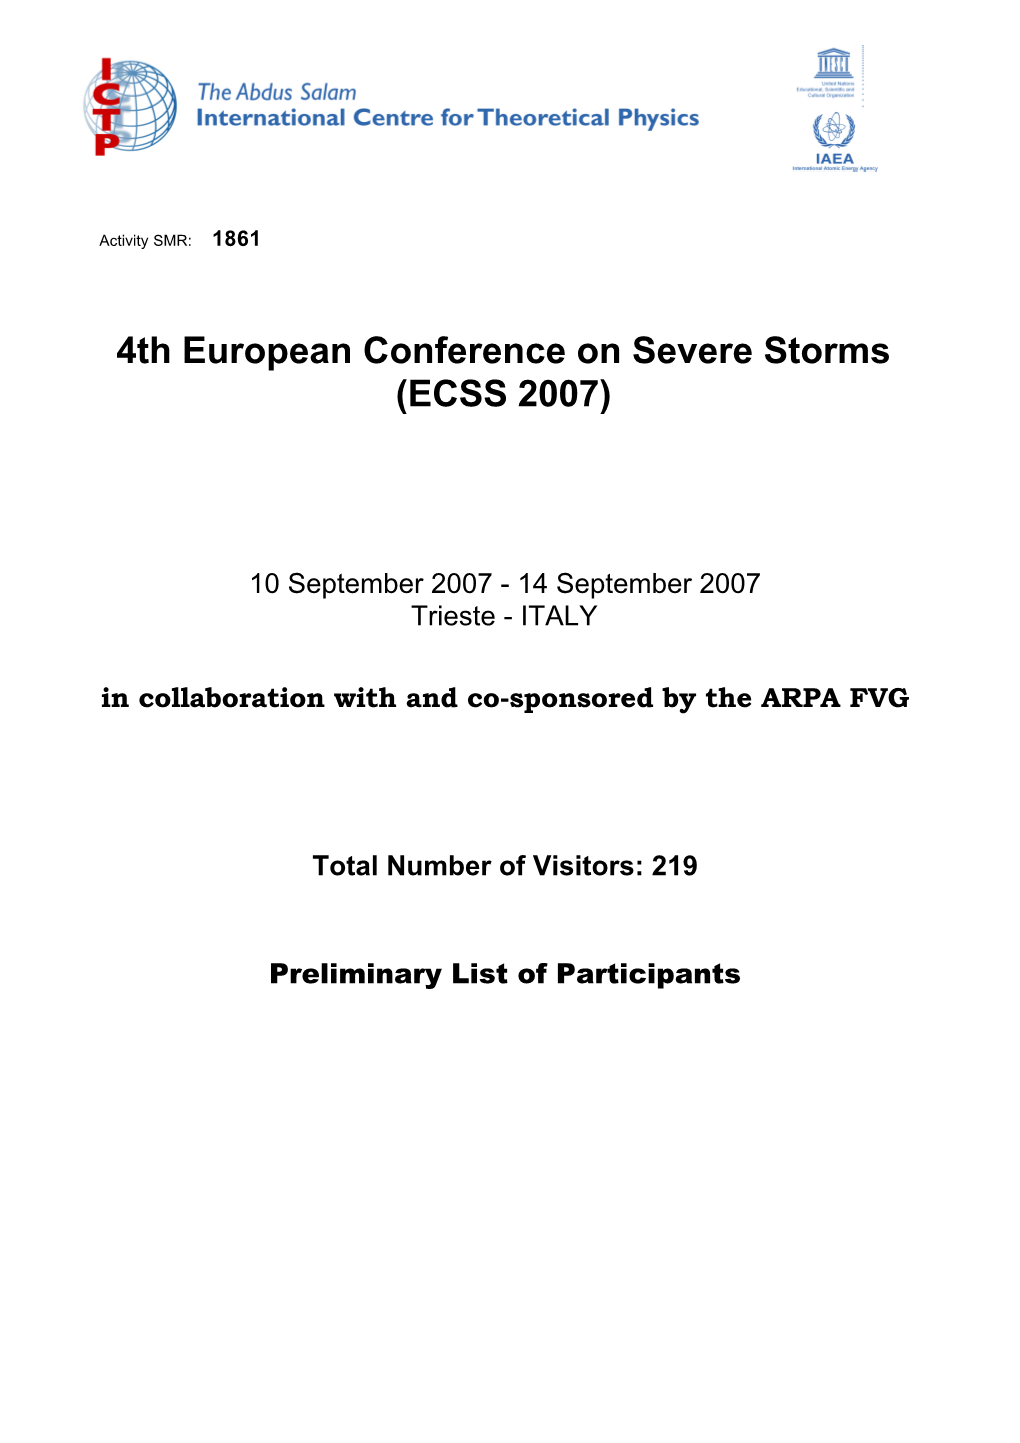 4Th European Conference on Severe Storms (ECSS 2007)